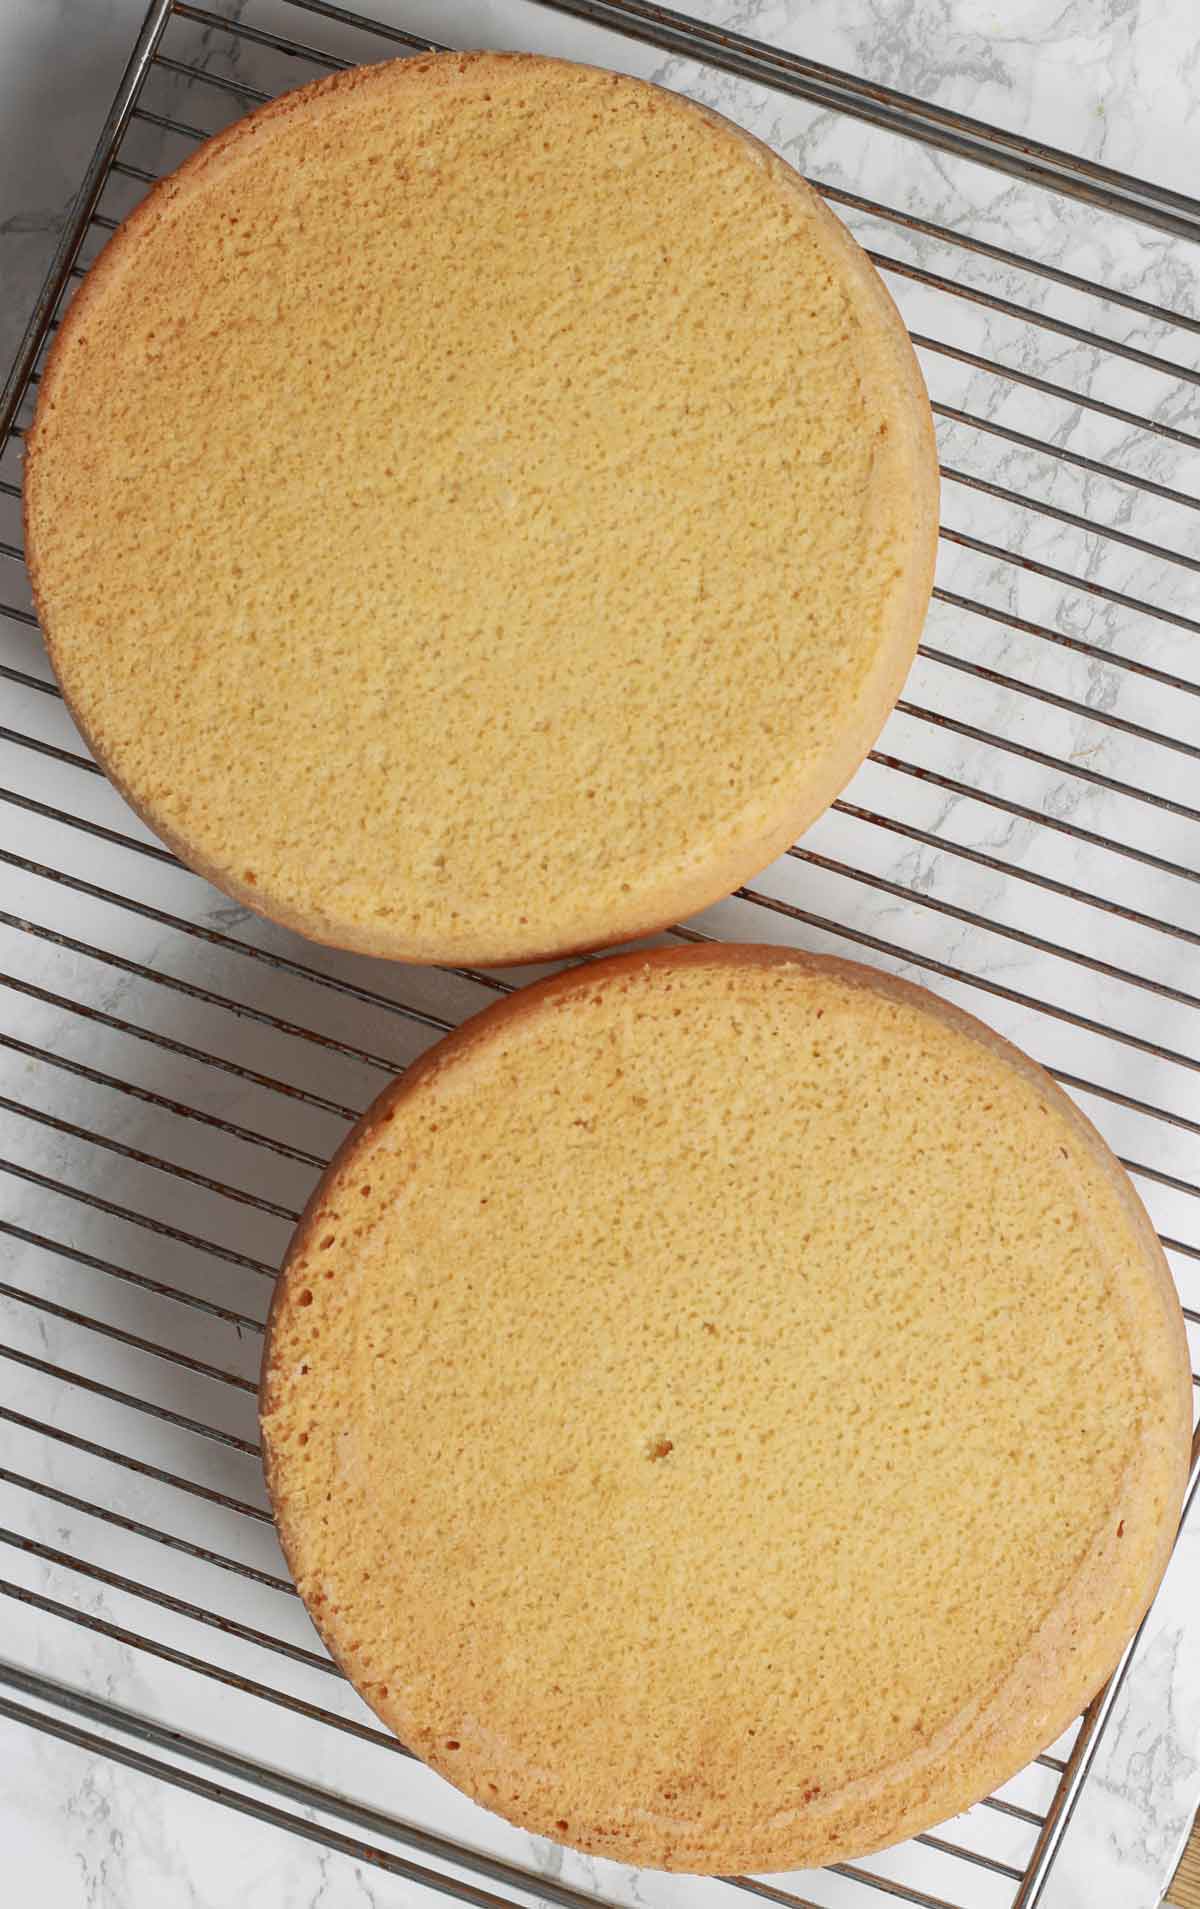 Two Vegan Sponge Cakes On A Cooling Rack